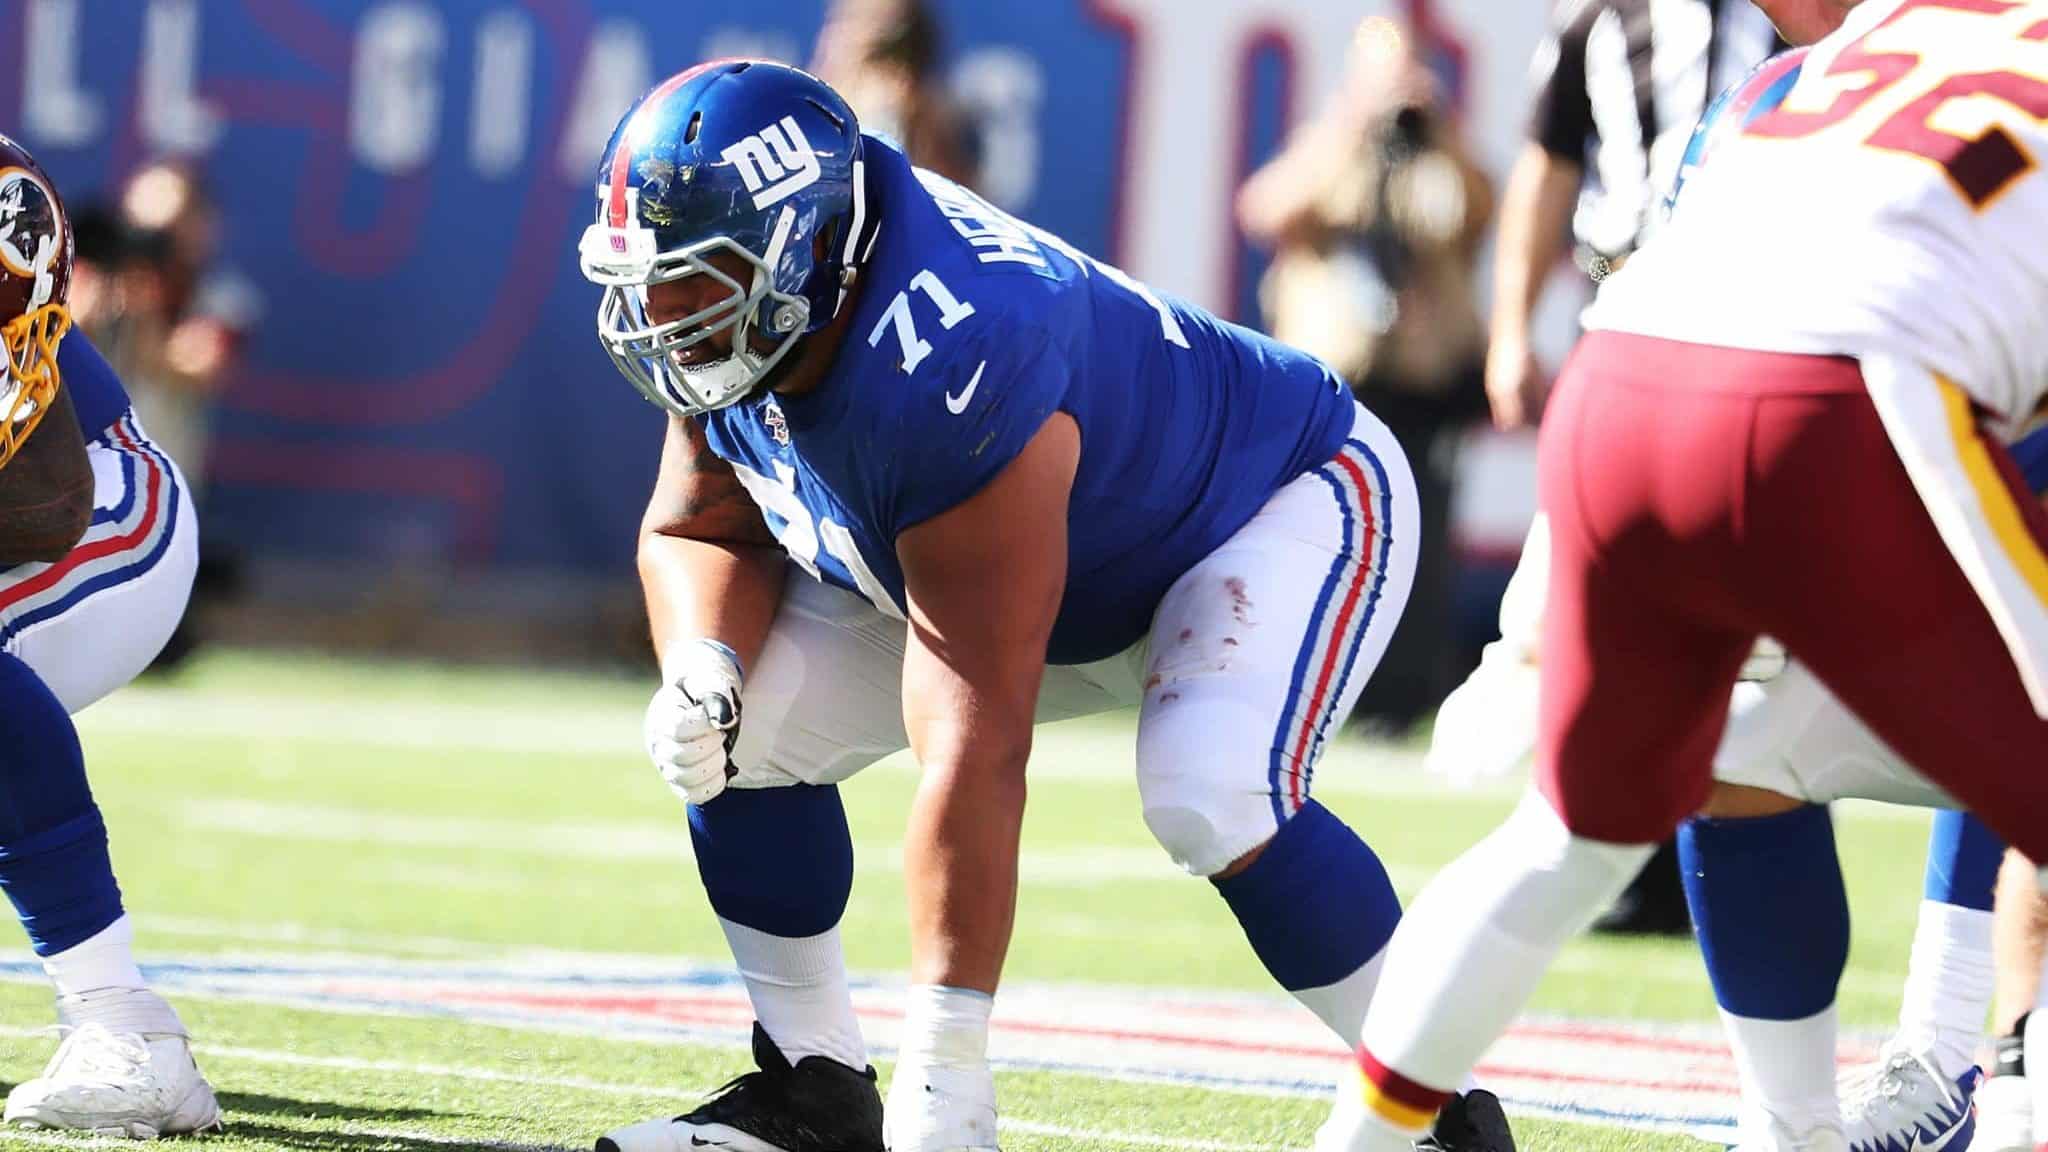 EAST RUTHERFORD, NEW JERSEY - SEPTEMBER 29: Will Hernandez #71 of the New York Giants in action against the Washington Redskins during their game at MetLife Stadium on September 29, 2019 in East Rutherford, New Jersey.